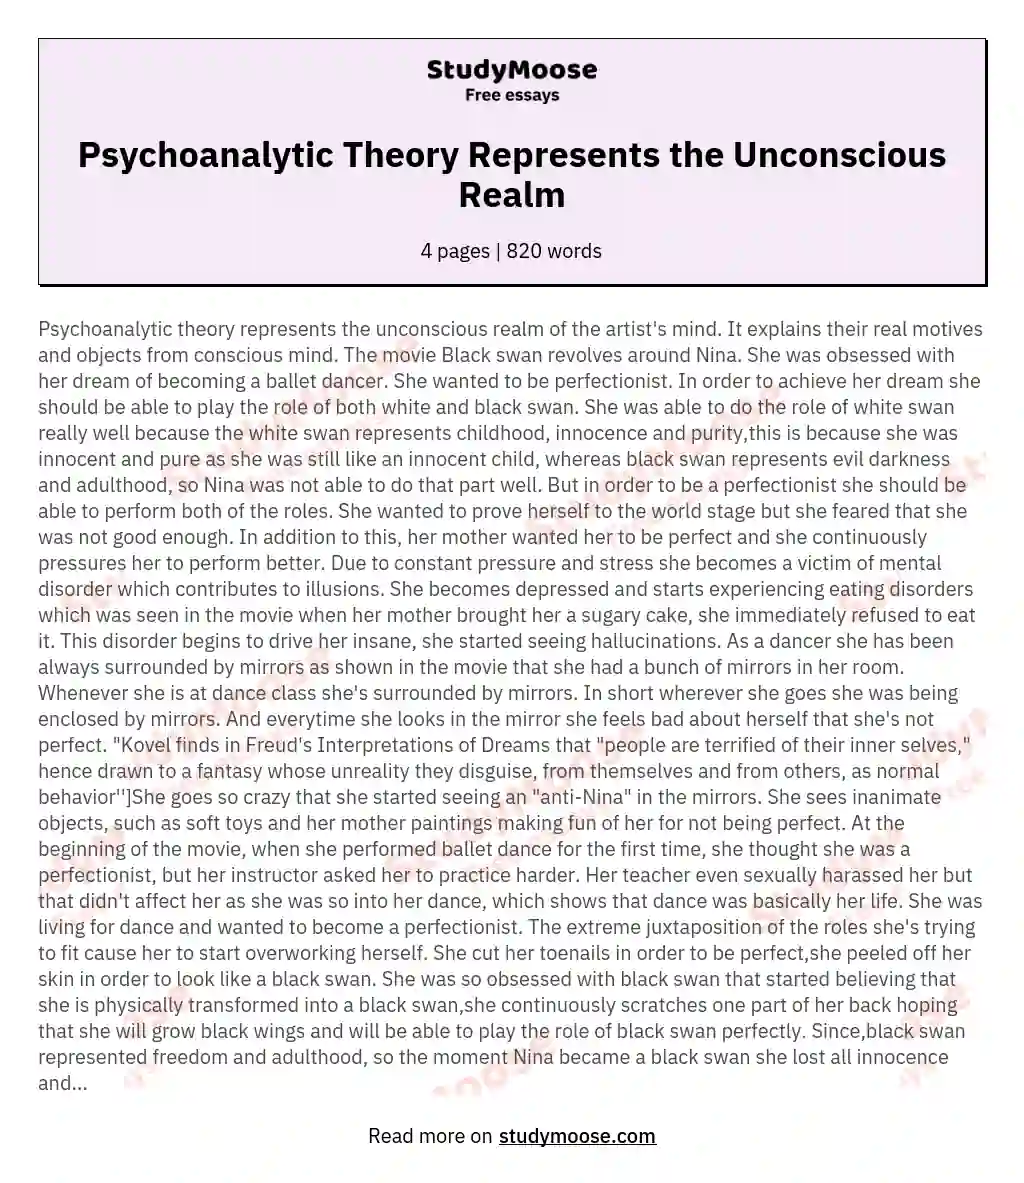 Psychoanalytic Theory Represents the Unconscious Realm essay